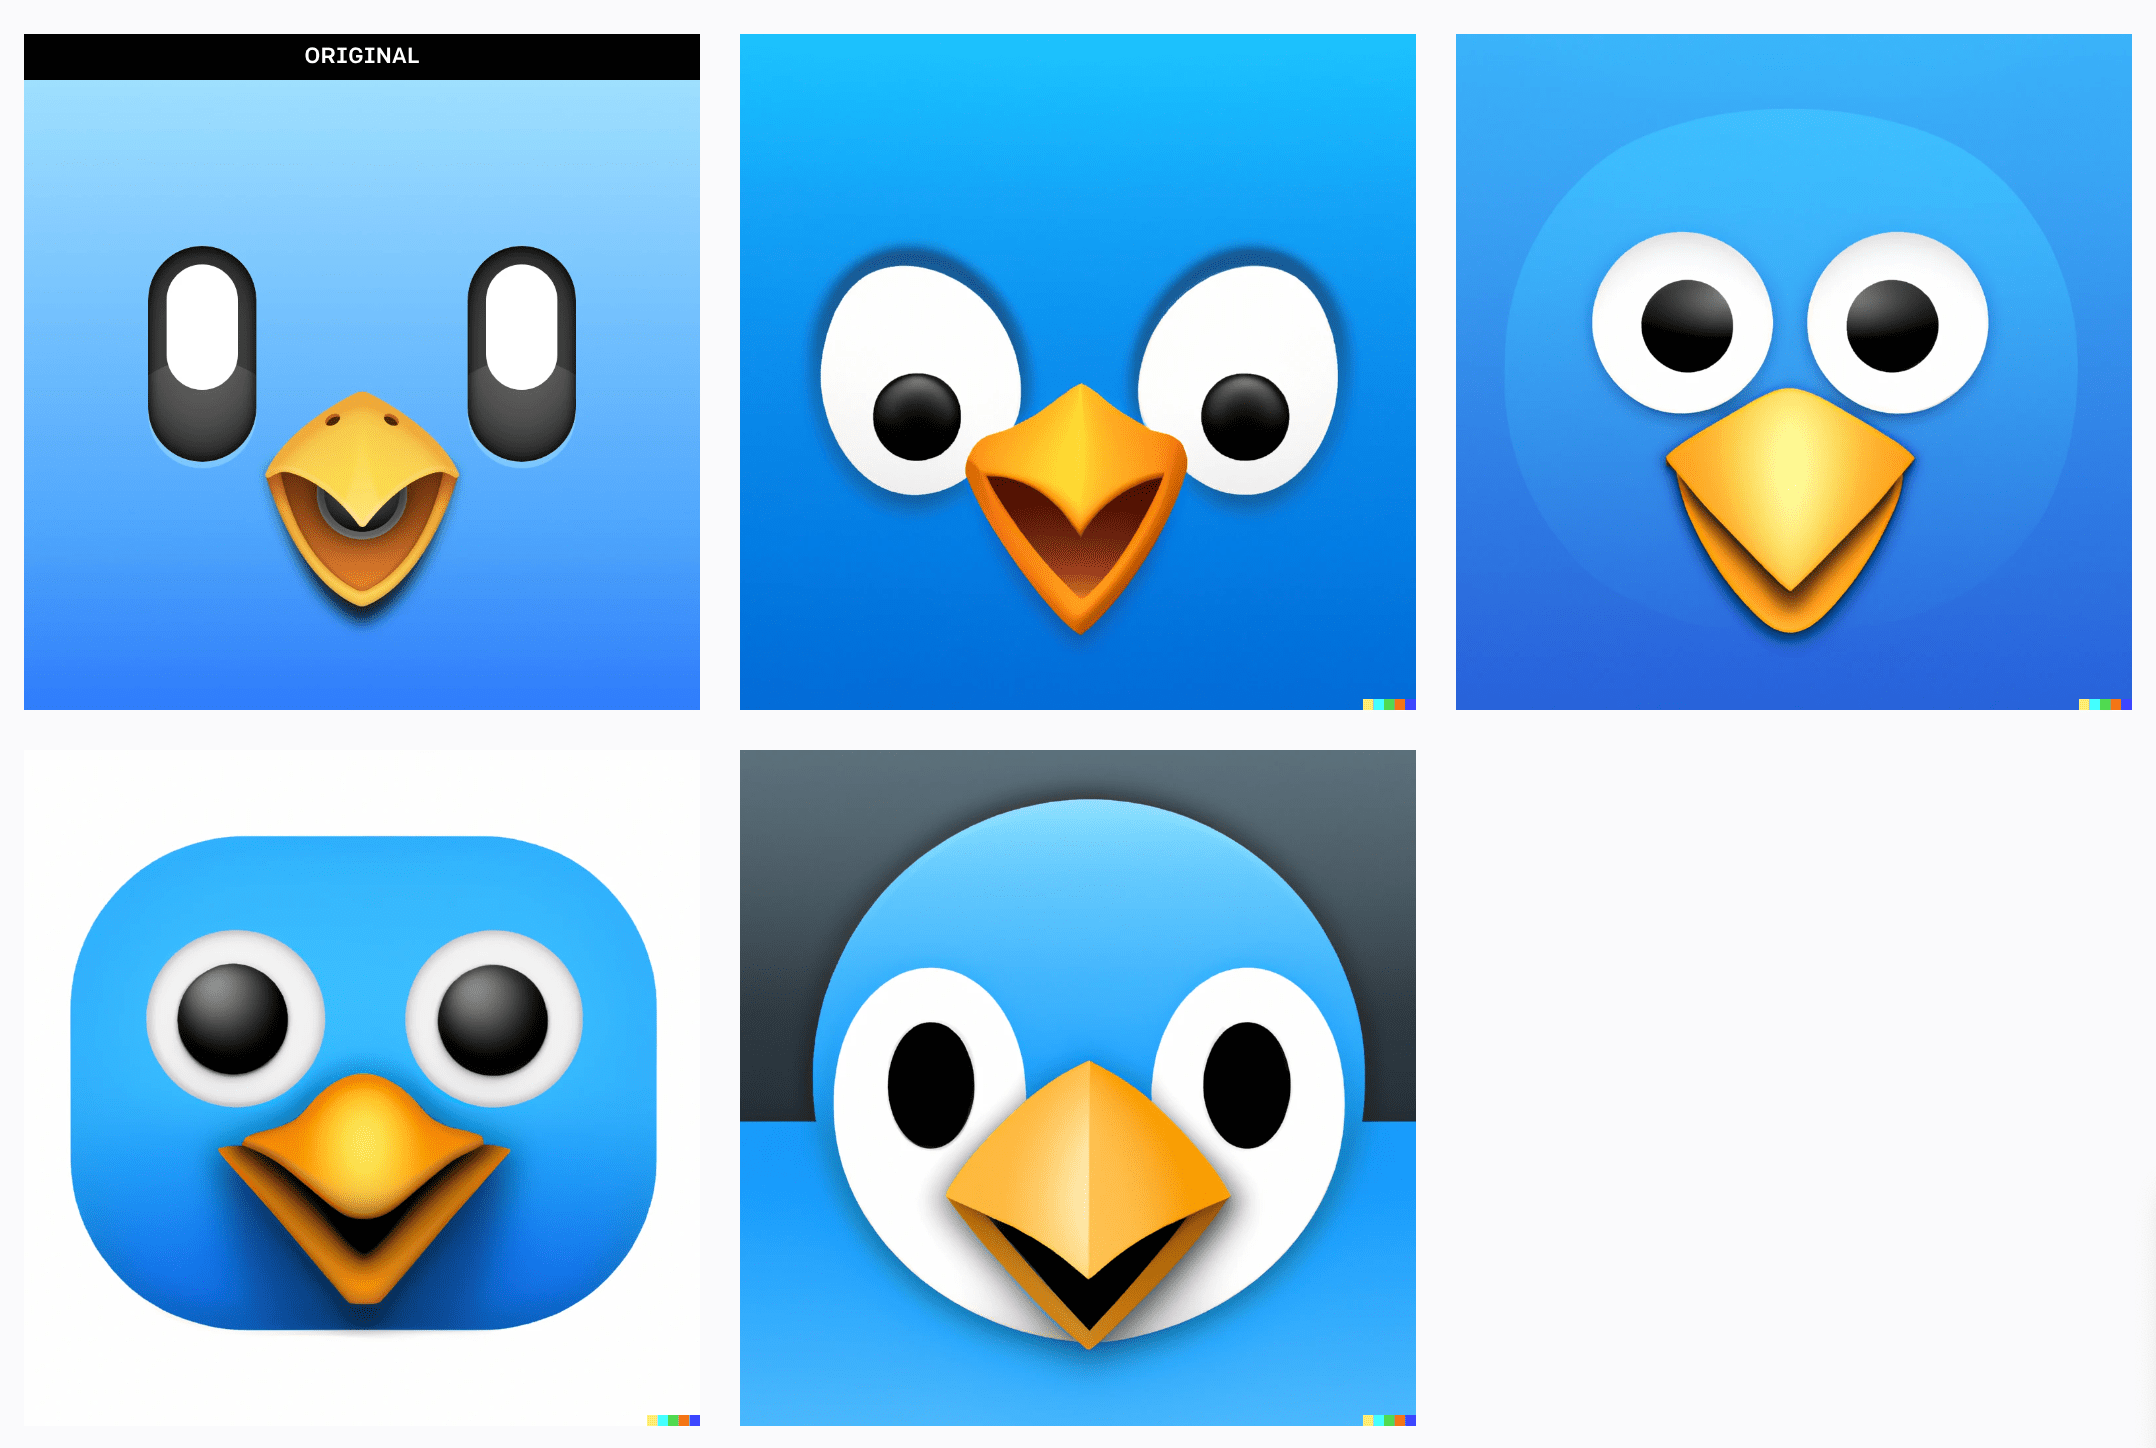 The original “Tweetbot 6” app icon with 4 AI-generated variations alongside it.